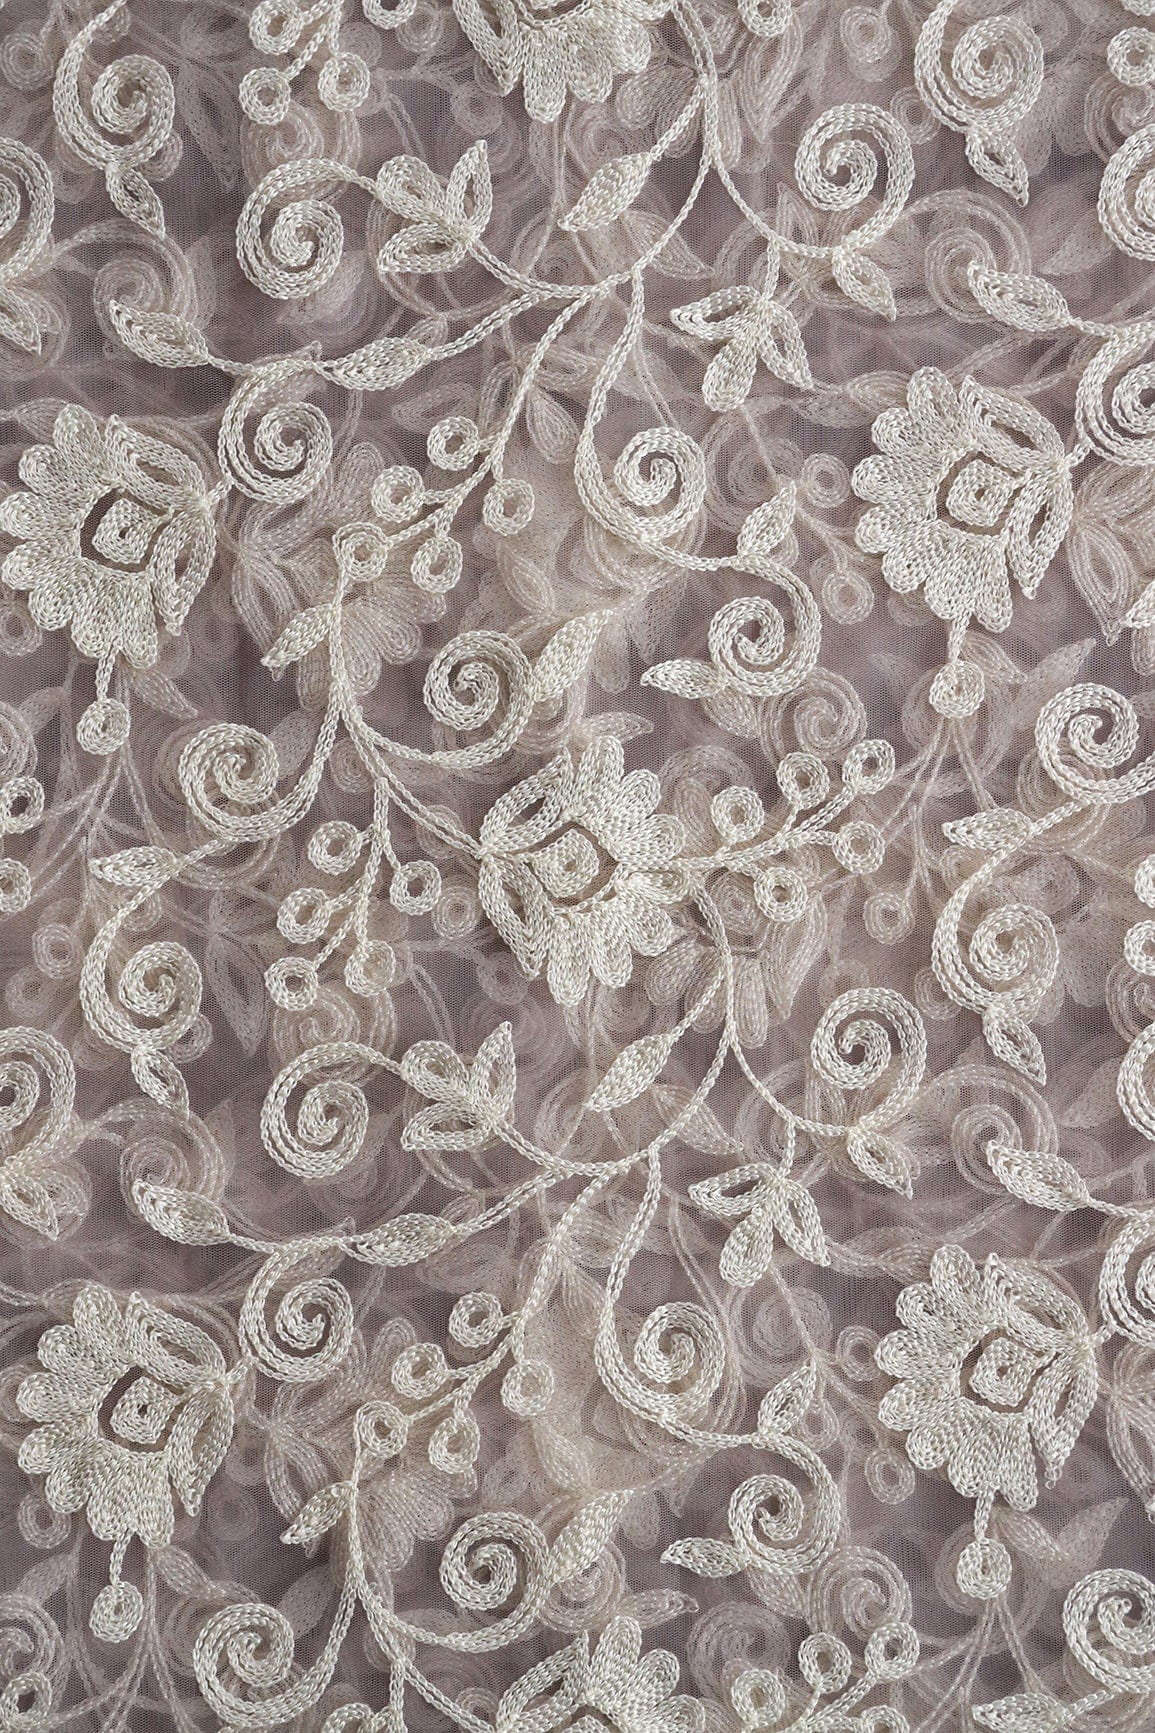 doeraa Embroidery Fabrics White Thread Beautiful Heavy Floral Embroidery On Lilac Purple Soft Net Fabric